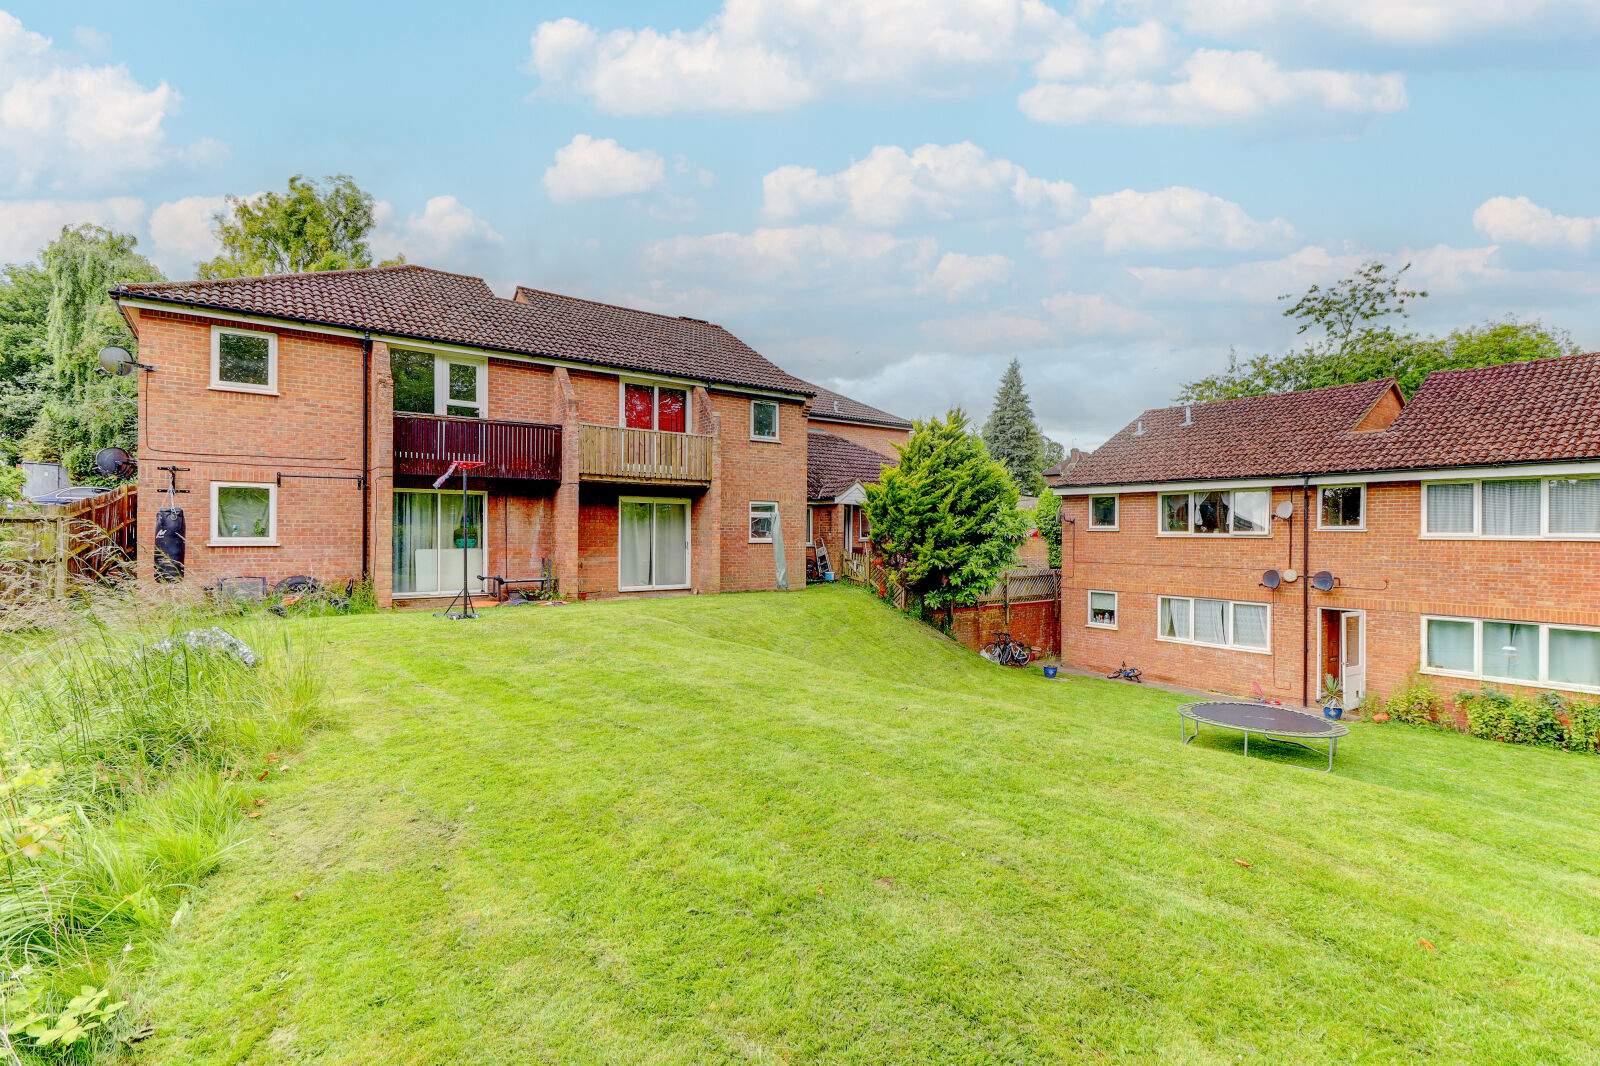 2 bedroom  flat for sale Eaton Avenue, High Wycombe, HP12, main image